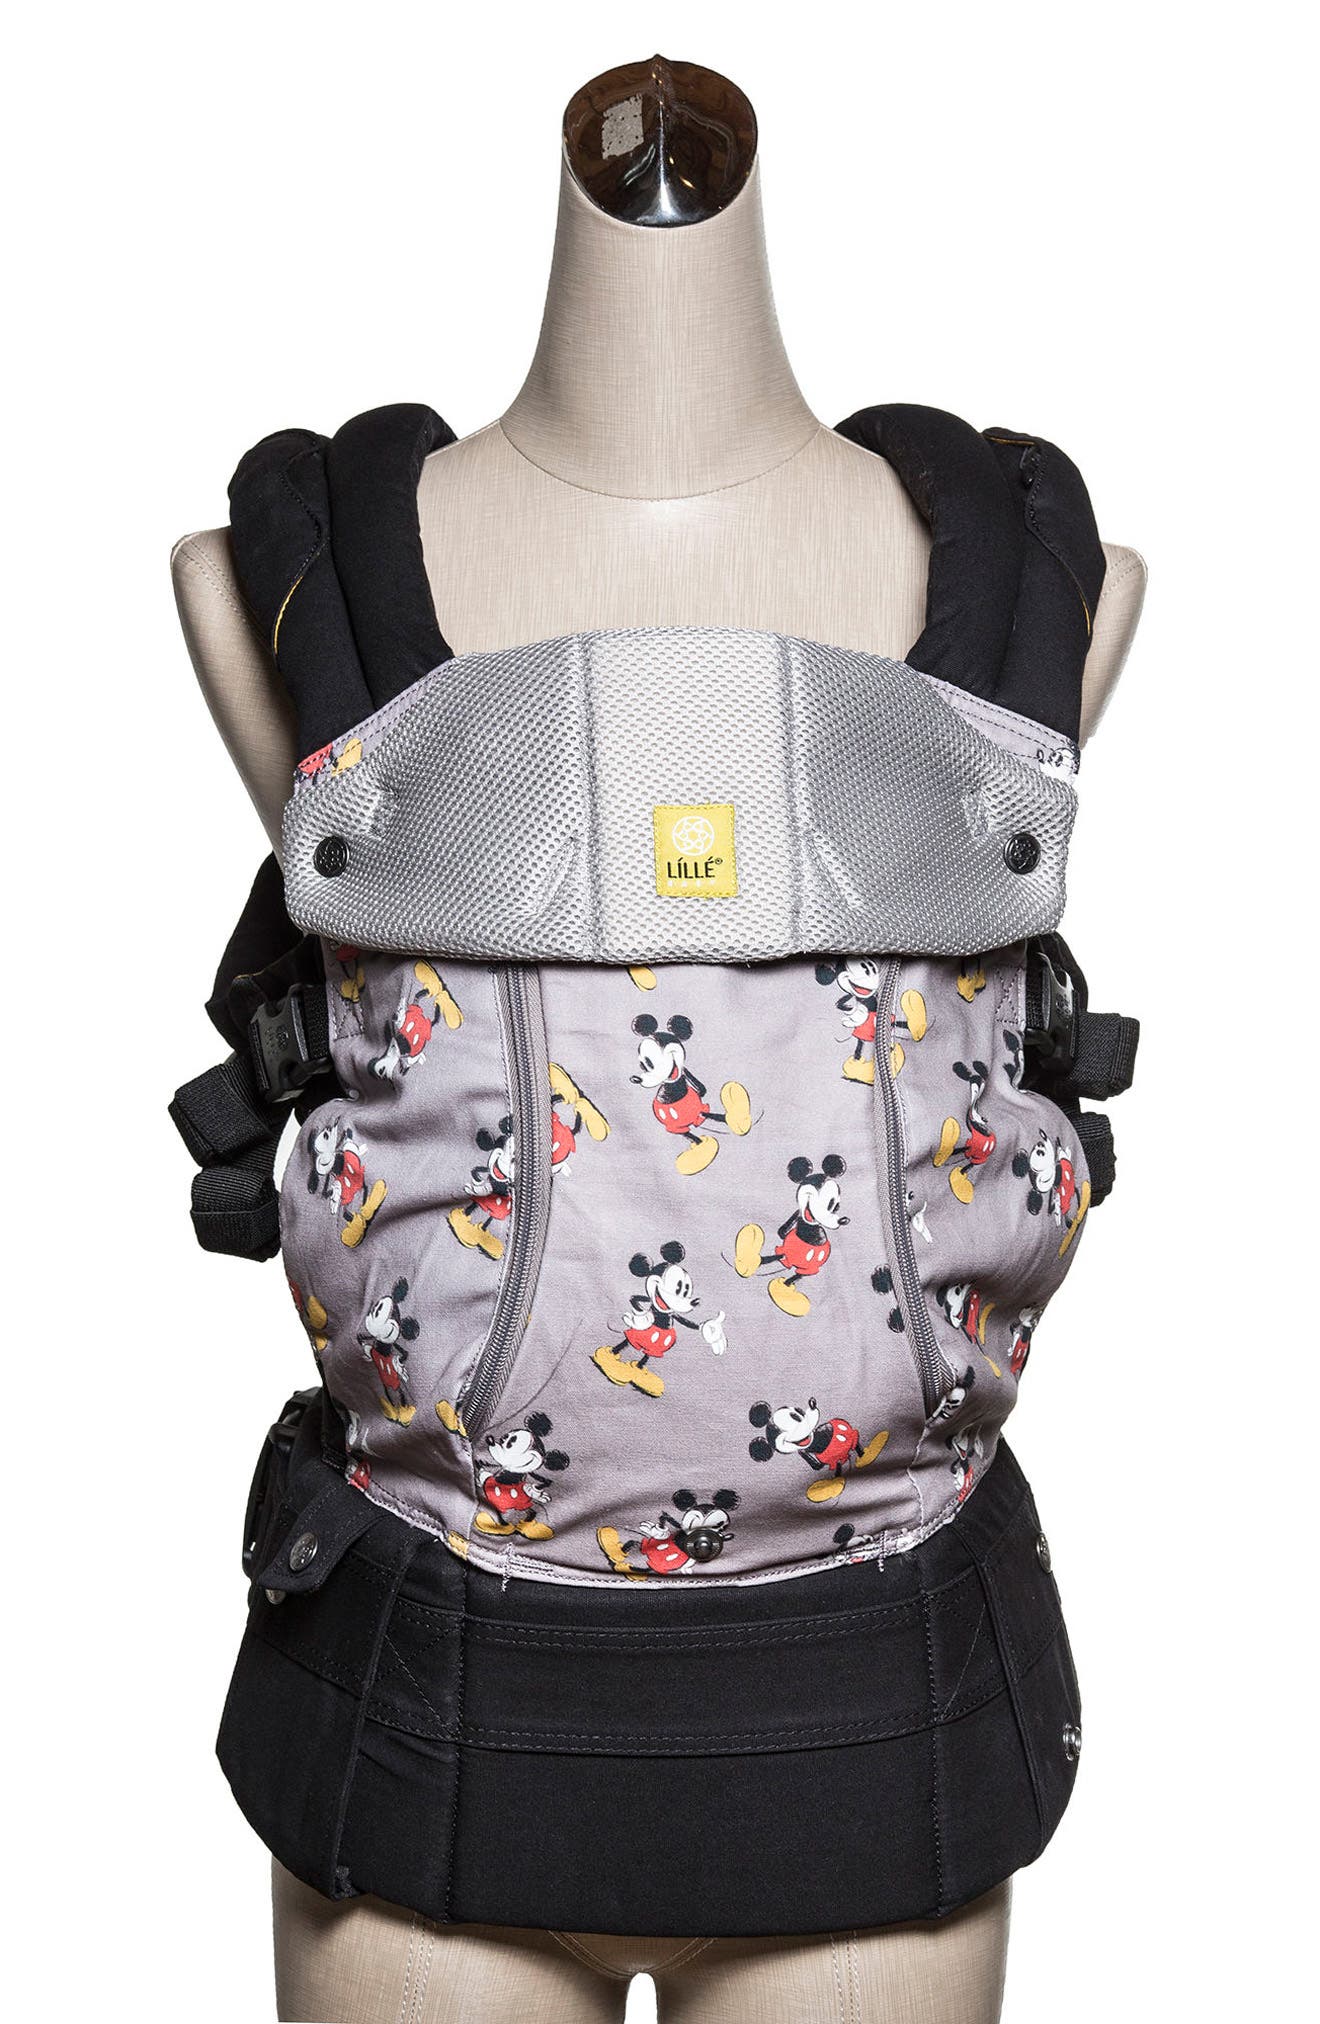 mickey mouse baby carrier